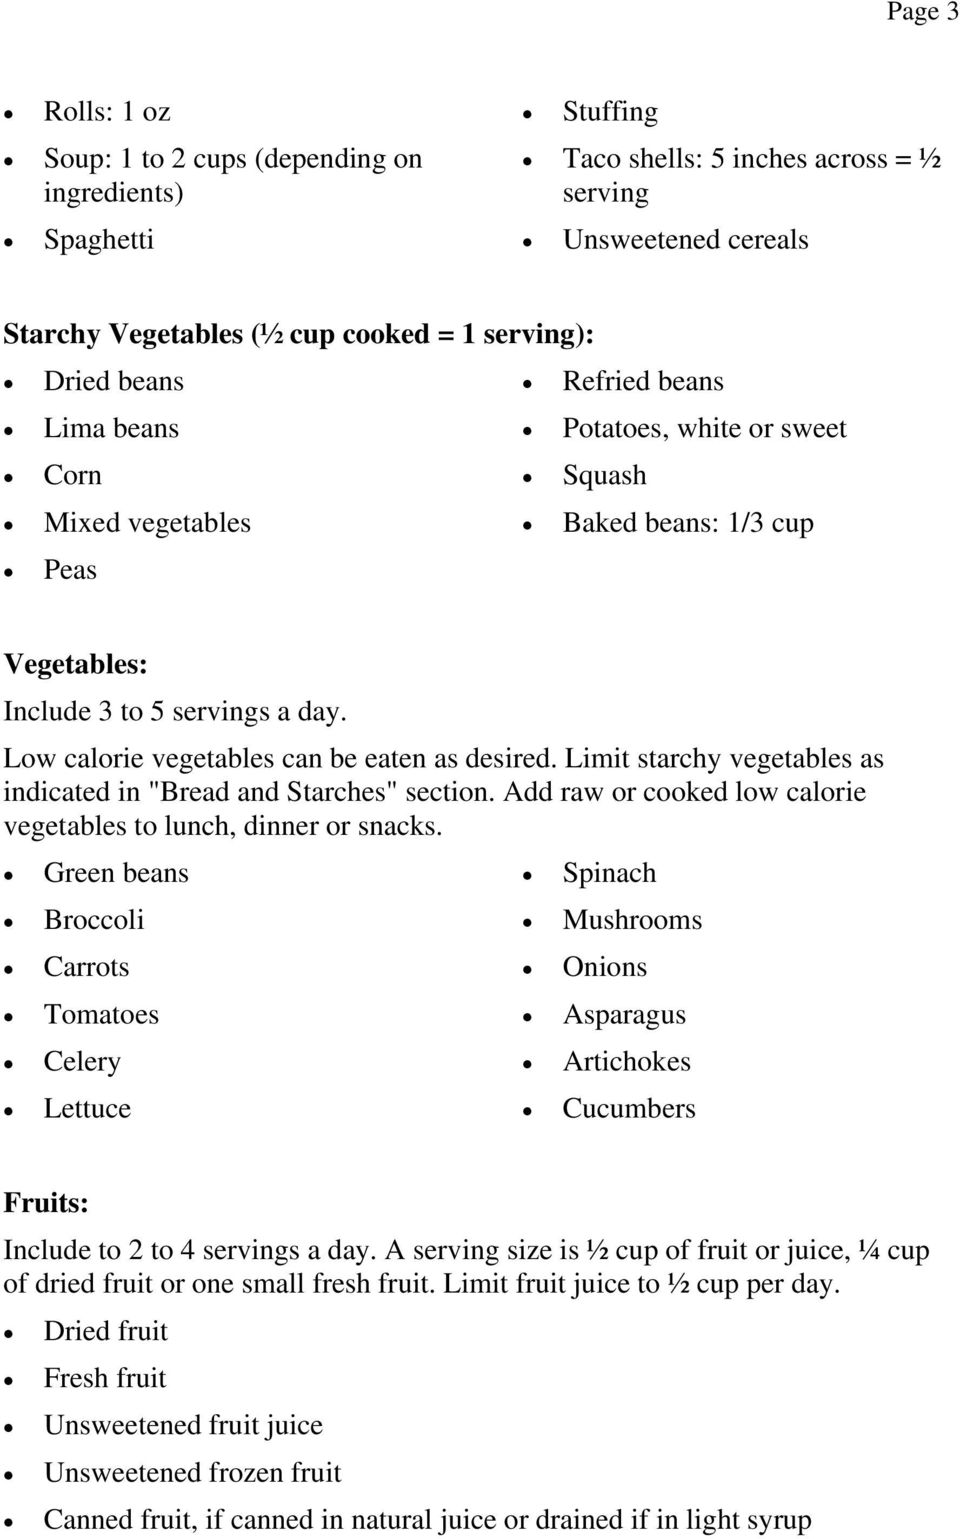 Low calorie vegetables can be eaten as desired. Limit starchy vegetables as indicated in "Bread and Starches" section. Add raw or cooked low calorie vegetables to lunch, dinner or snacks.